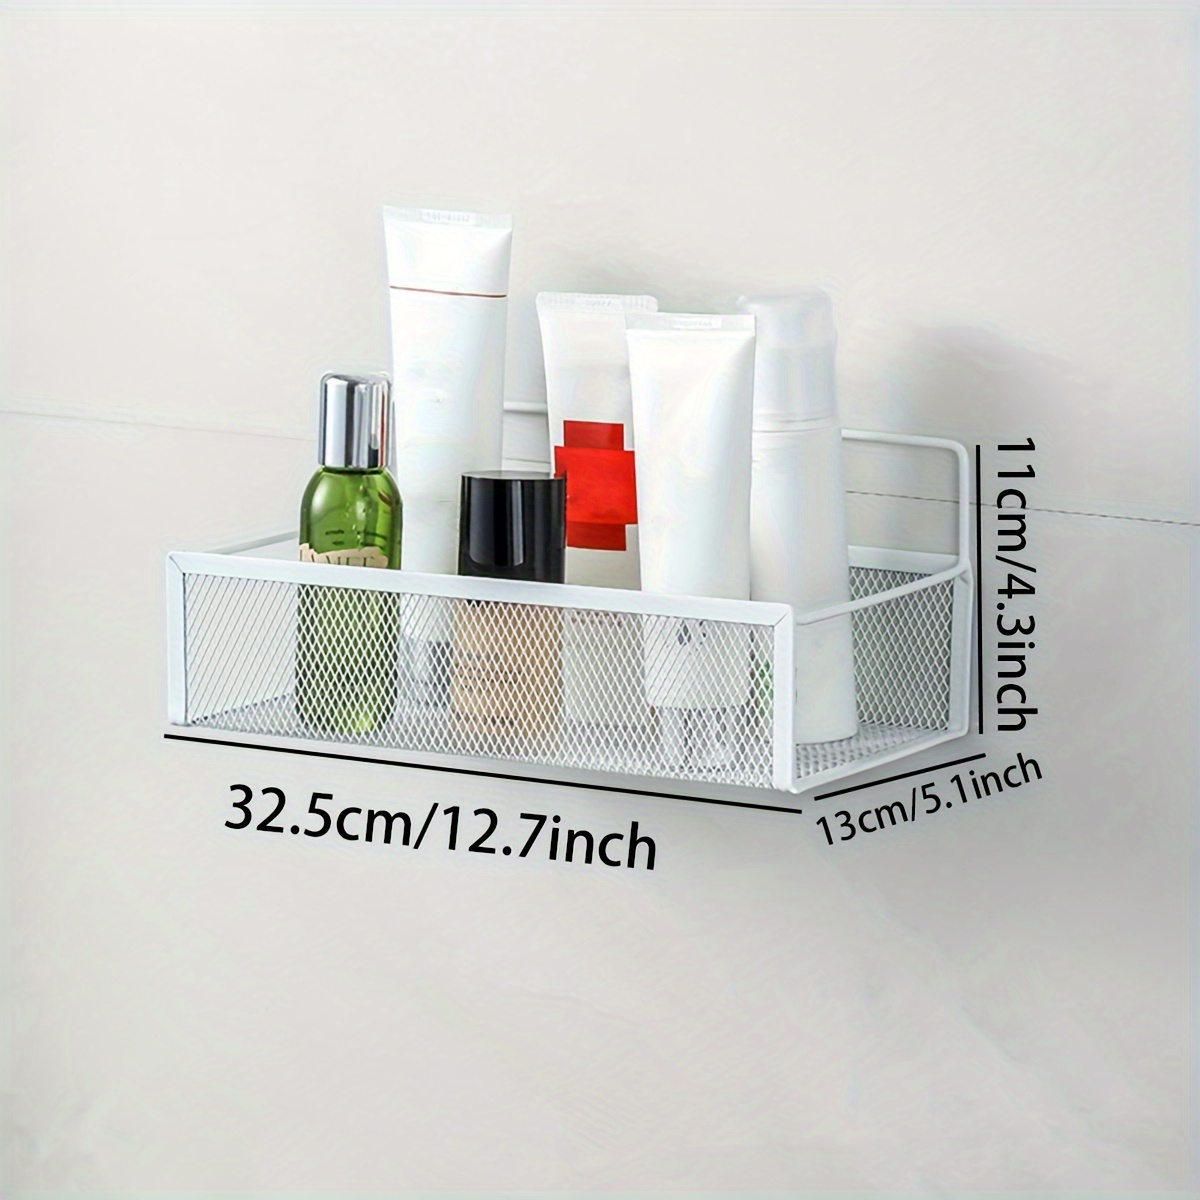 at Home Gray Shower Caddy, 4.3